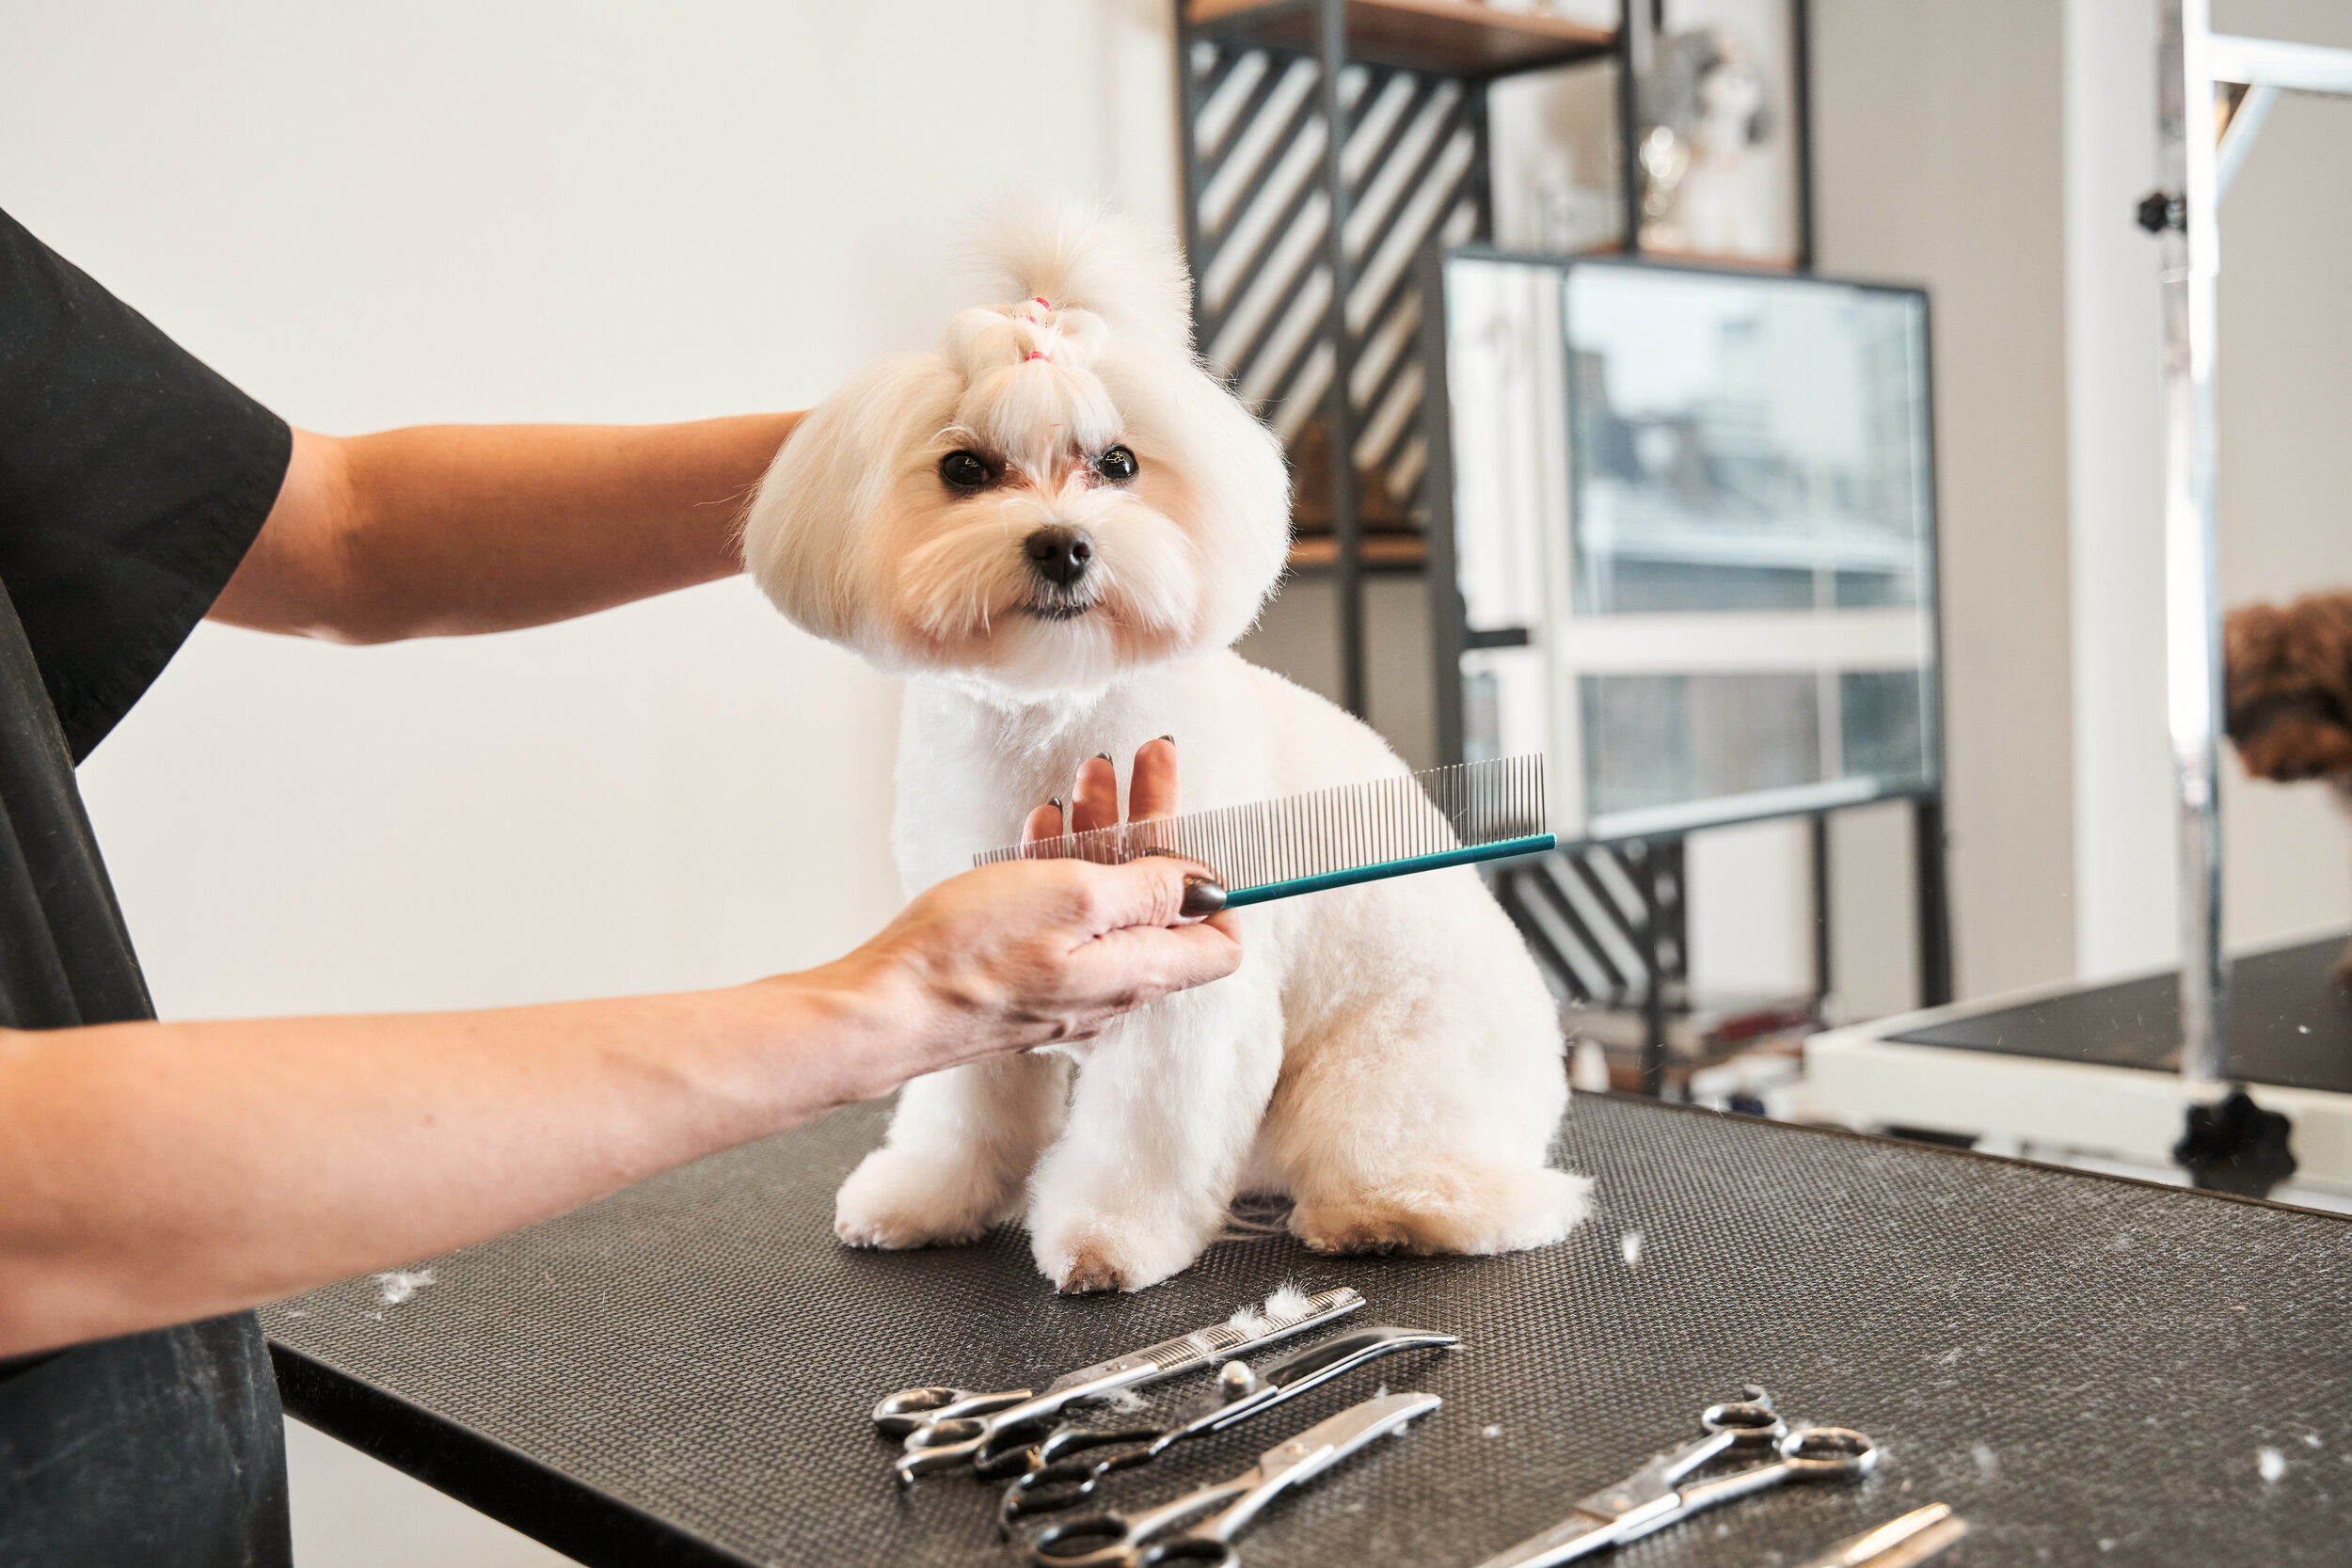 Groomer-holding-brush-at-the-hands-near-the-dog-1298295595_6000x4000.jpeg